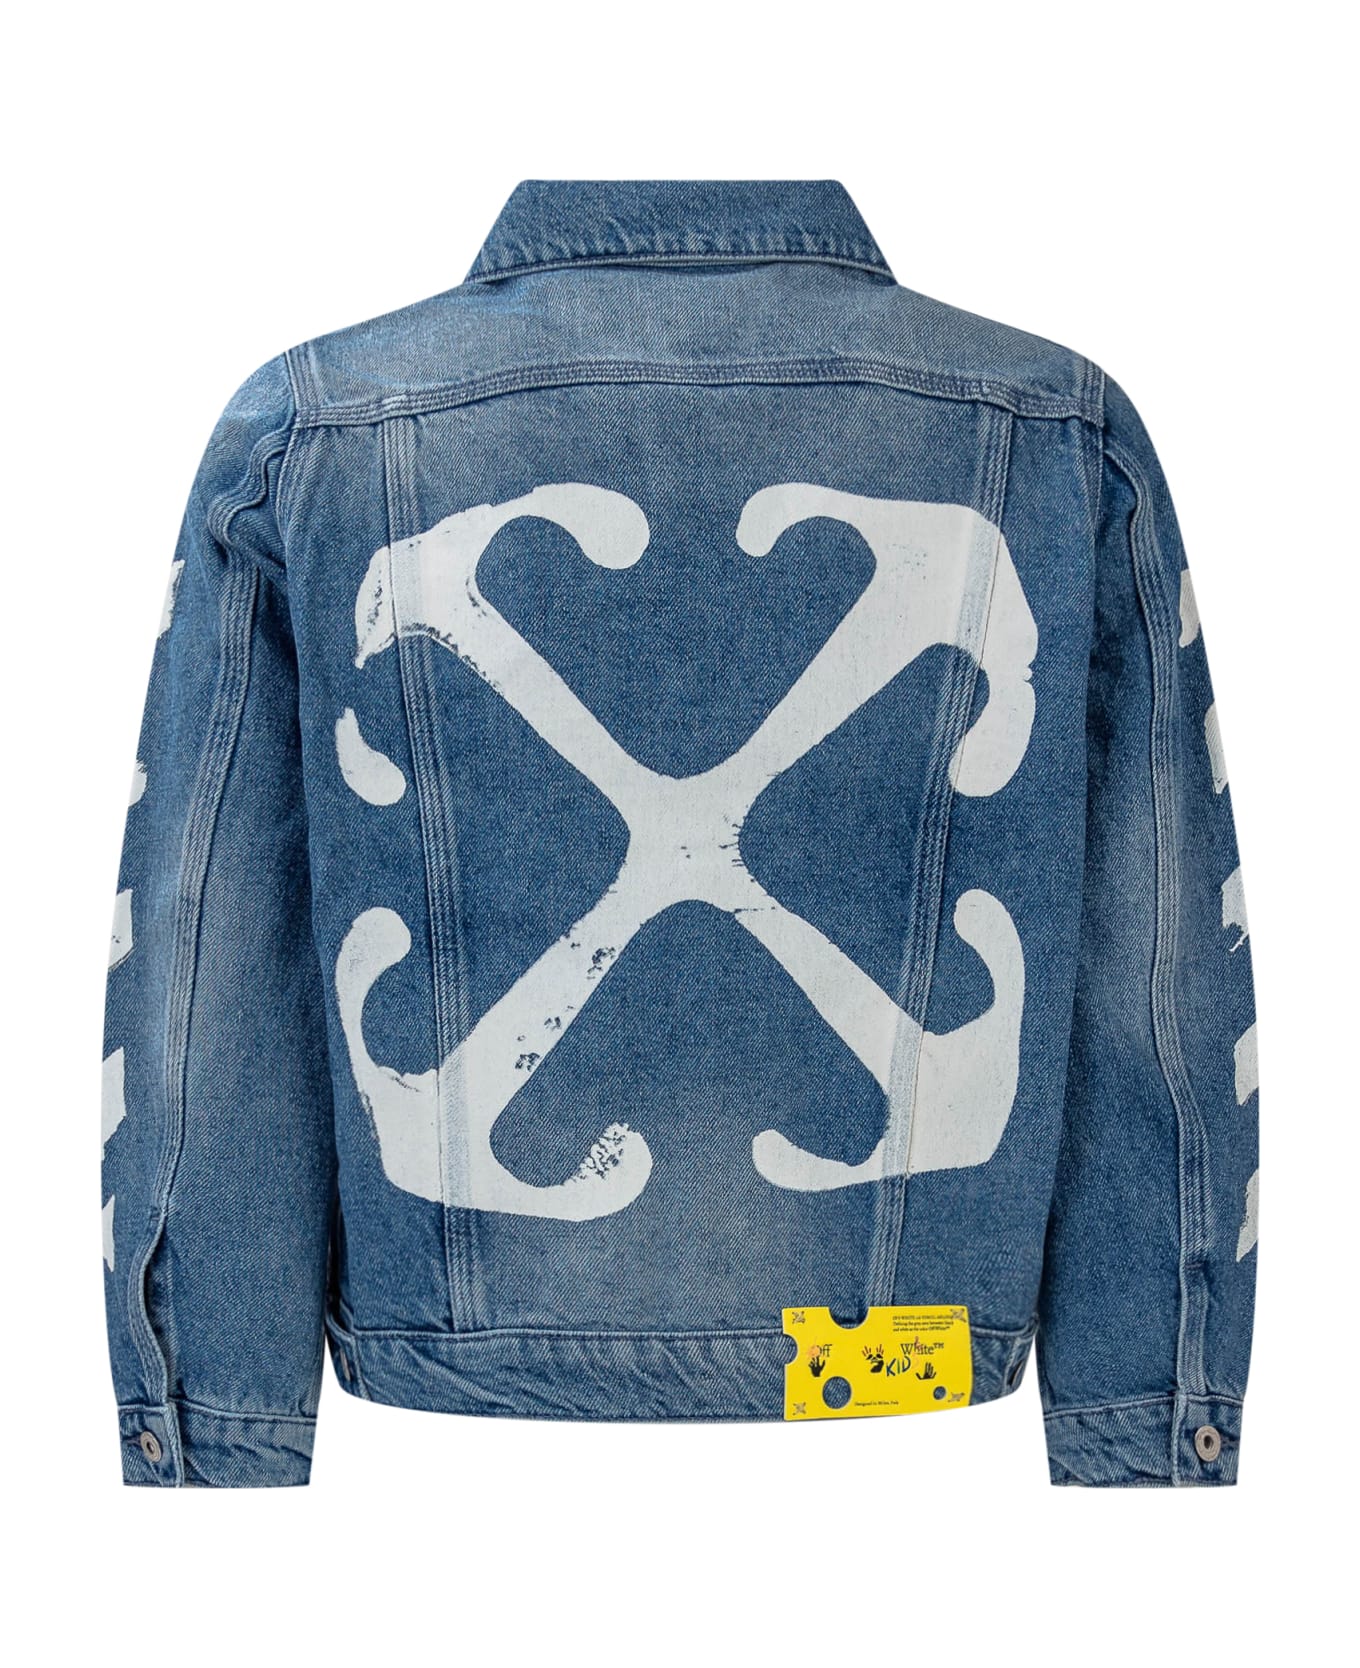 Off-White Paint Graphic Jacket - Blue